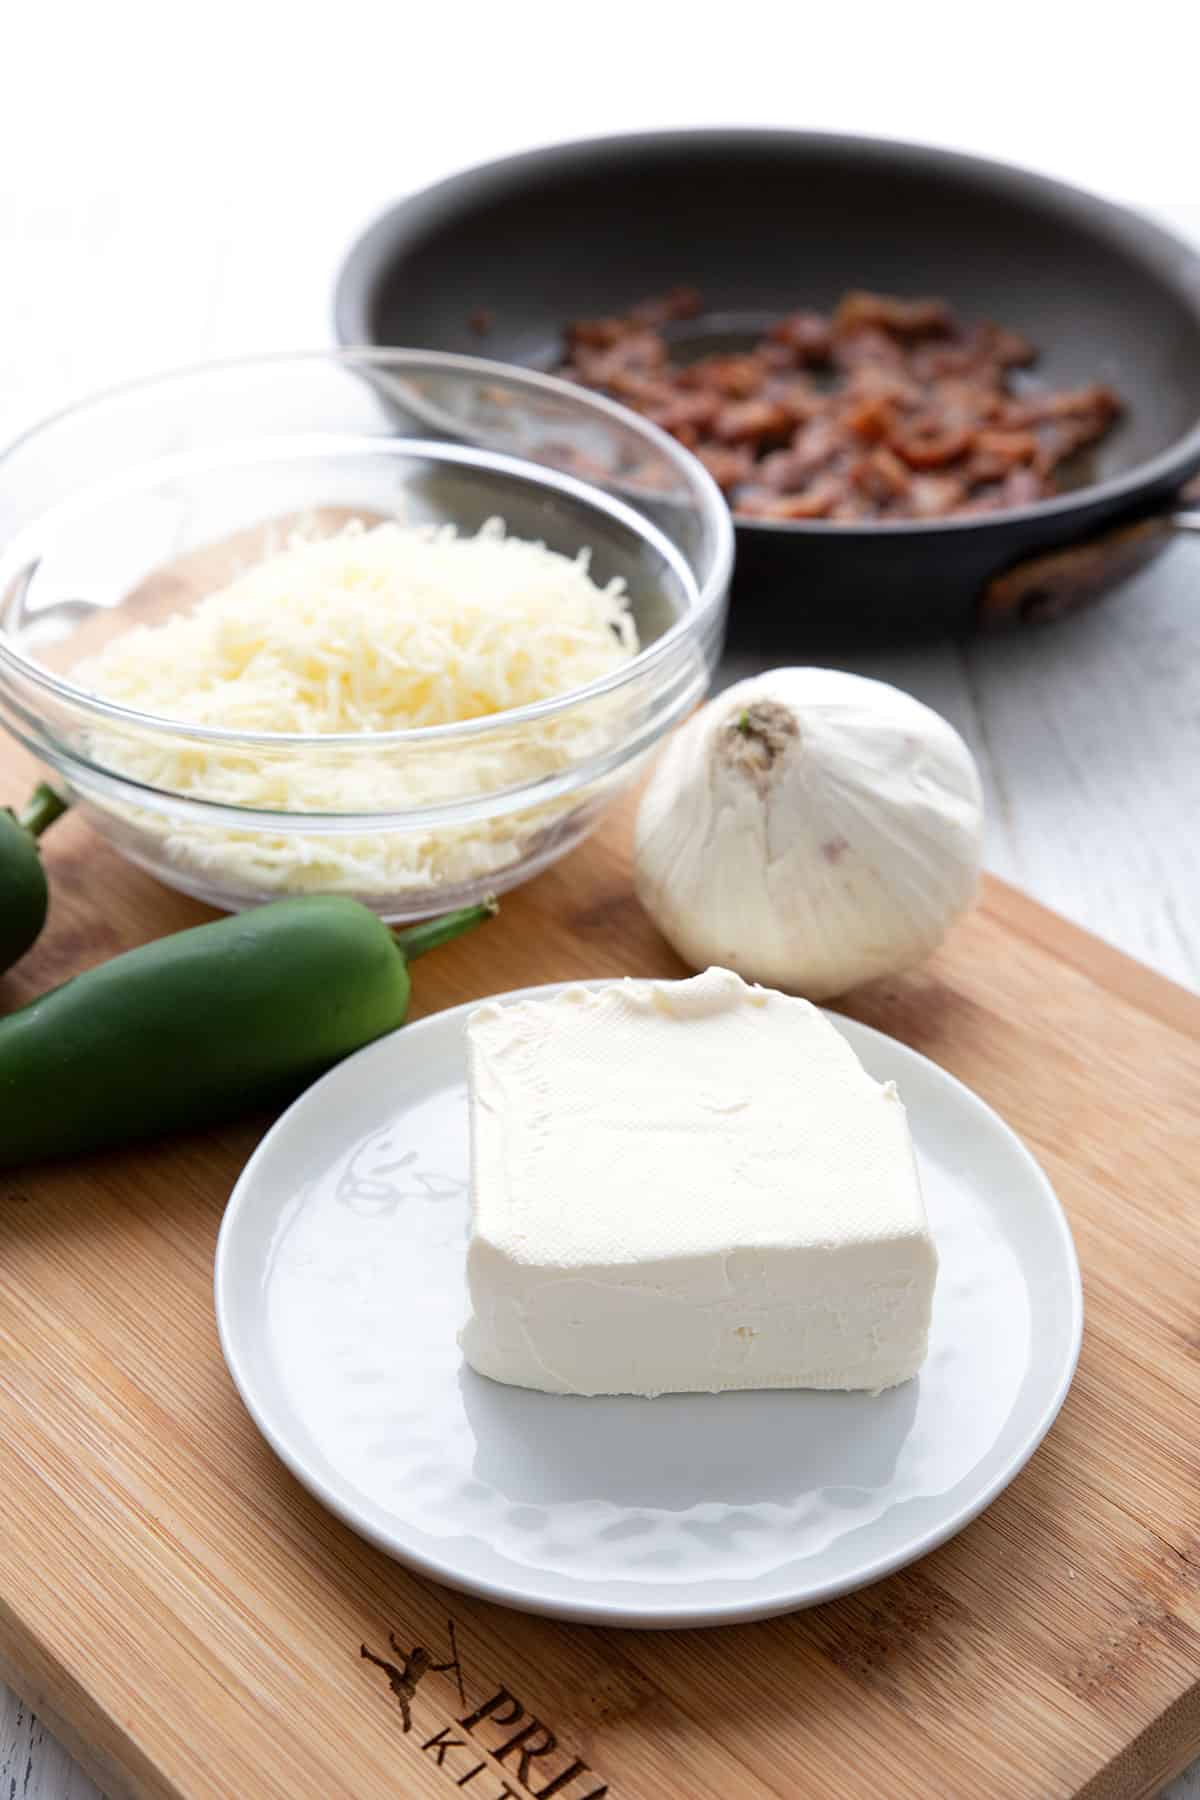 The ingredients for Jalapeno Popper Pizza.